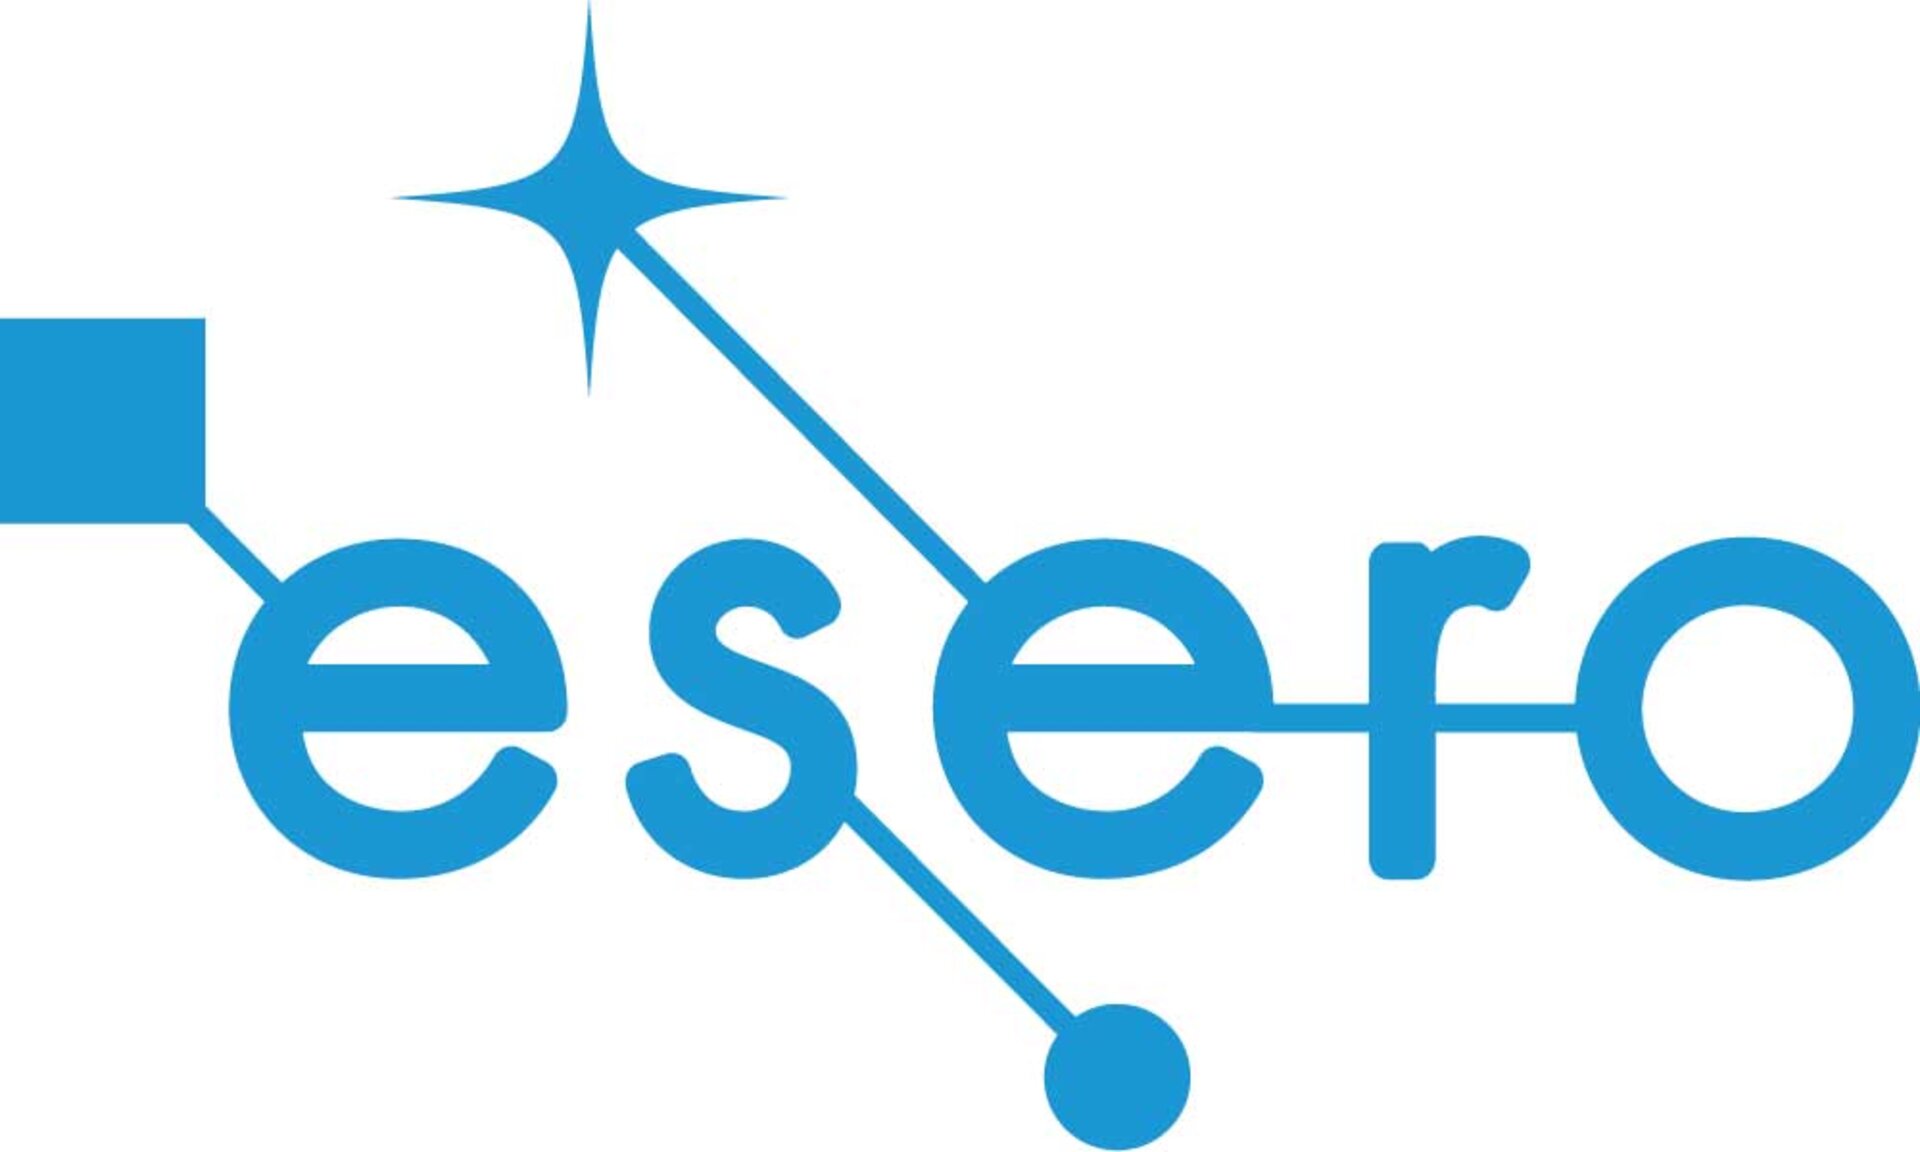 The European Space Education Resource Office (ESERO) project